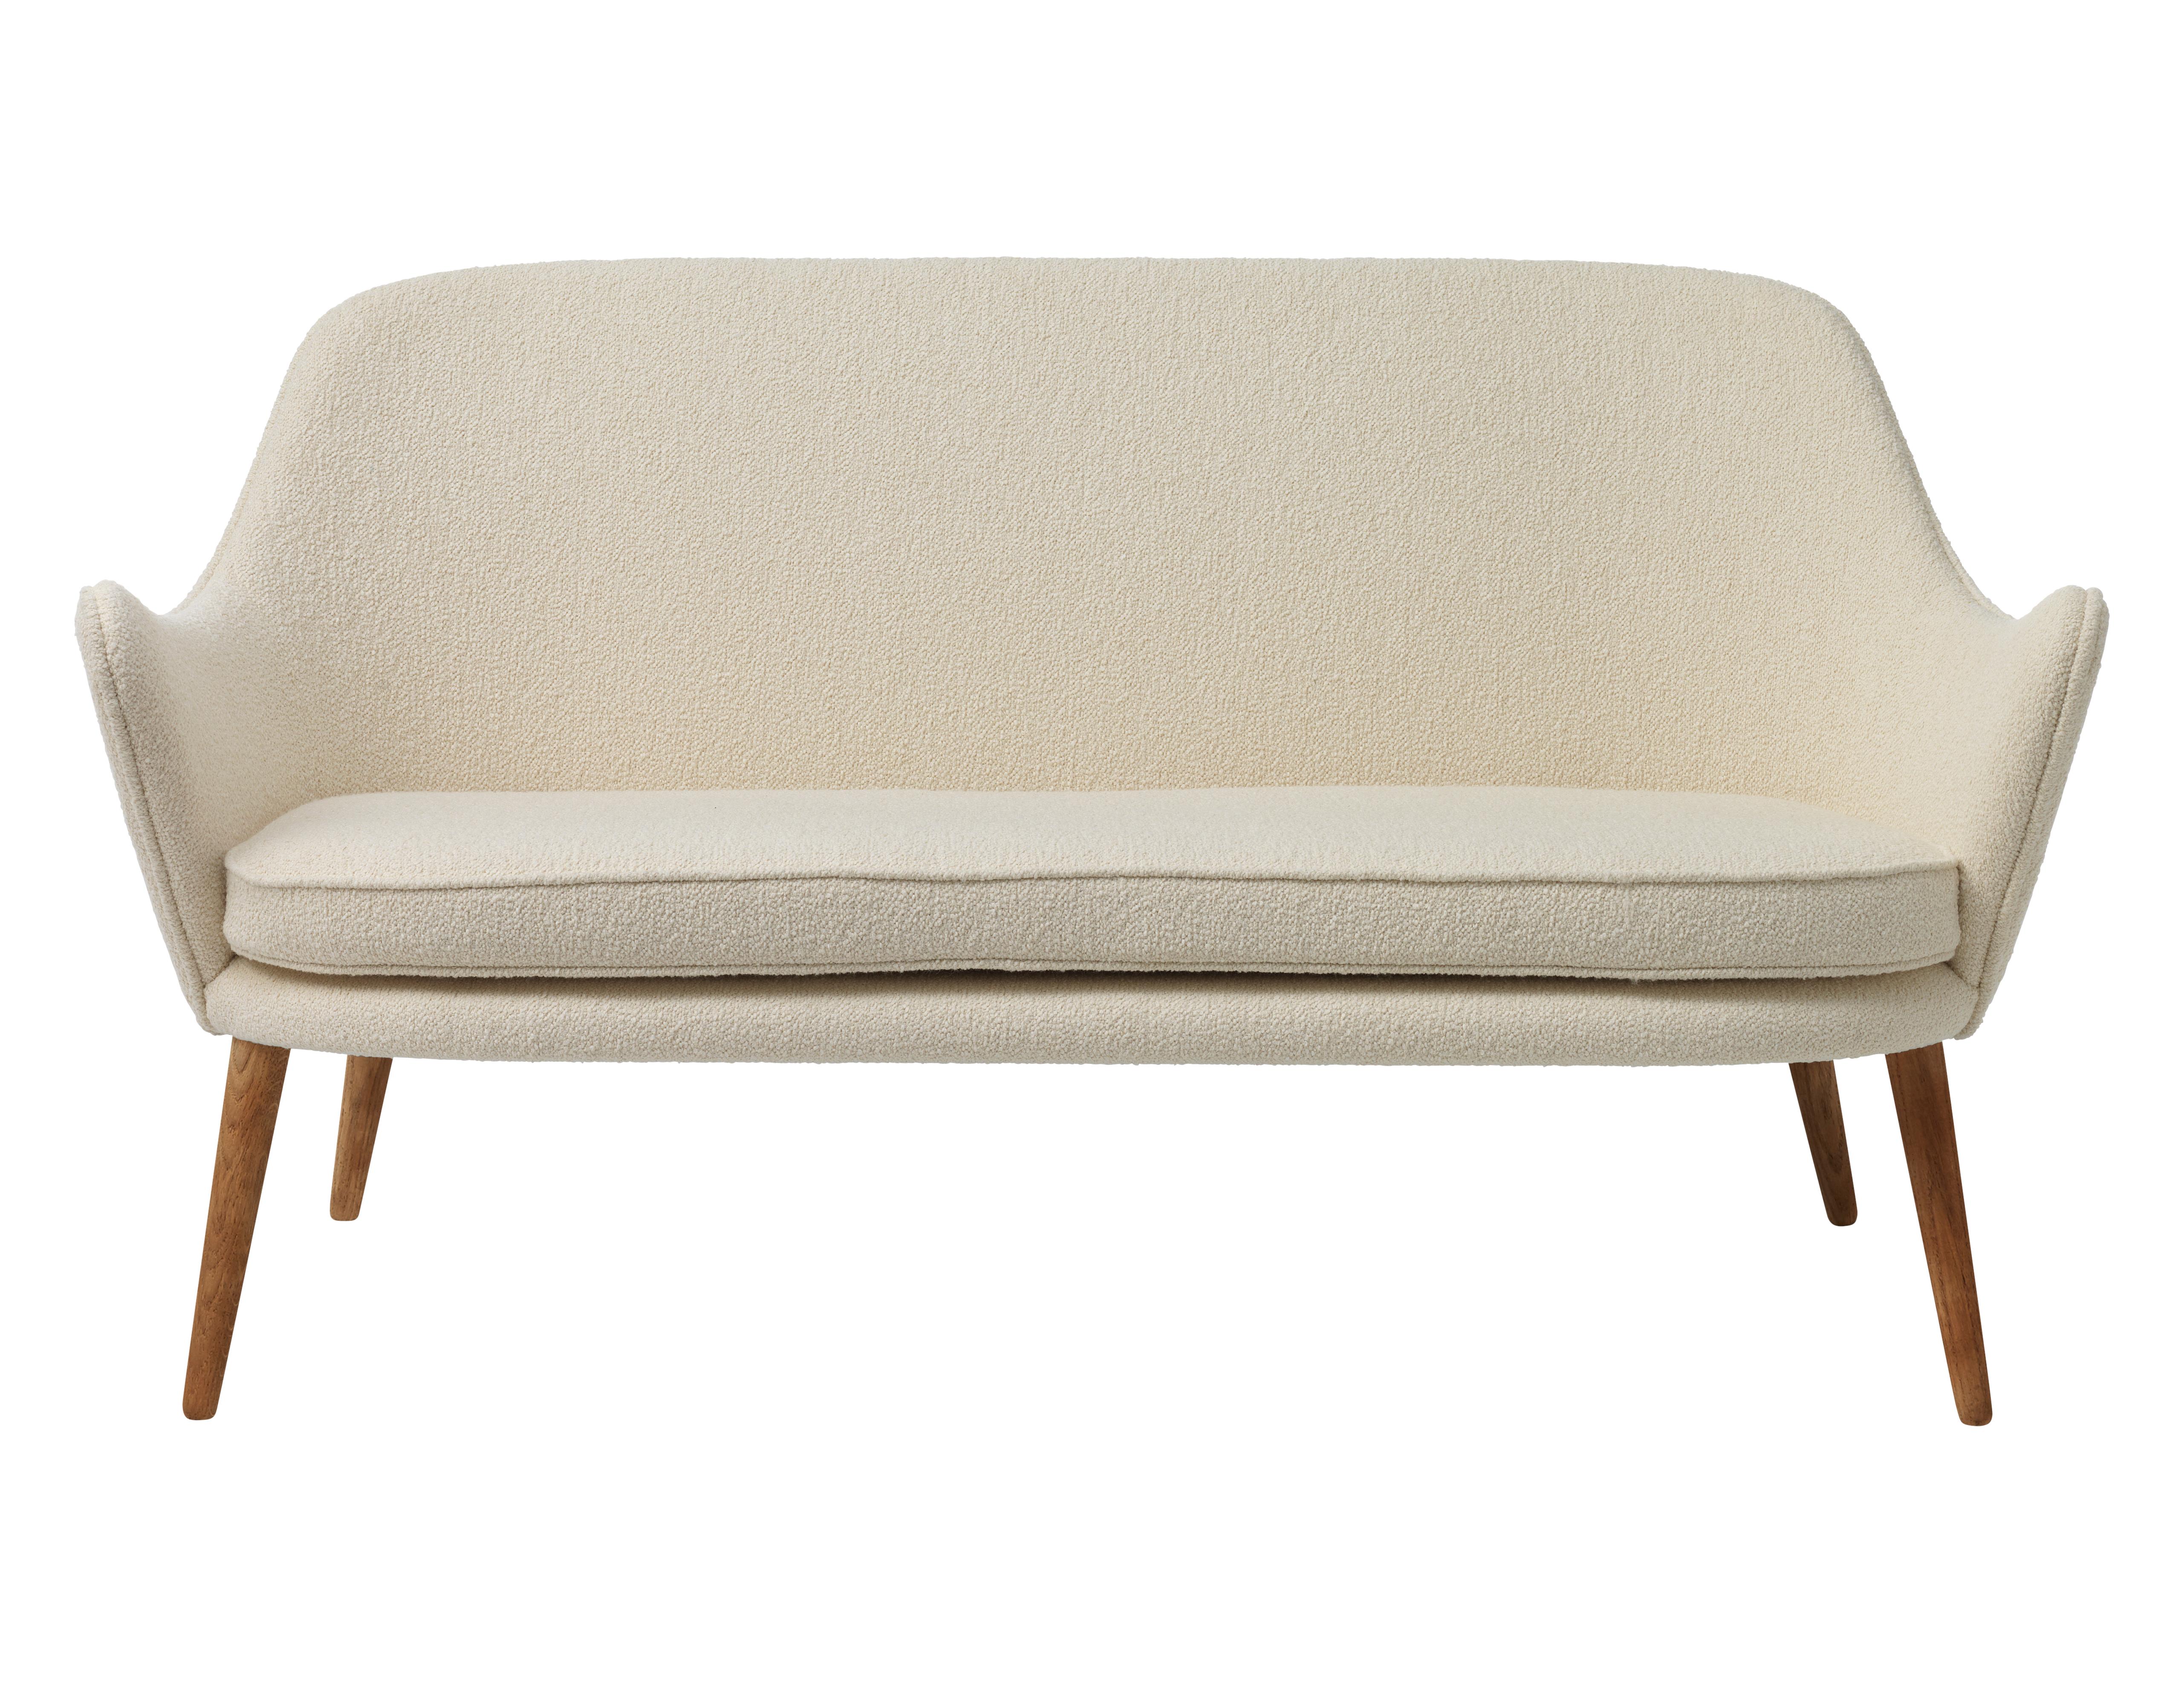 For Sale: White (Barnum24) Dwell 2-Seat Sofa, by Hans Olsen from Warm Nordic